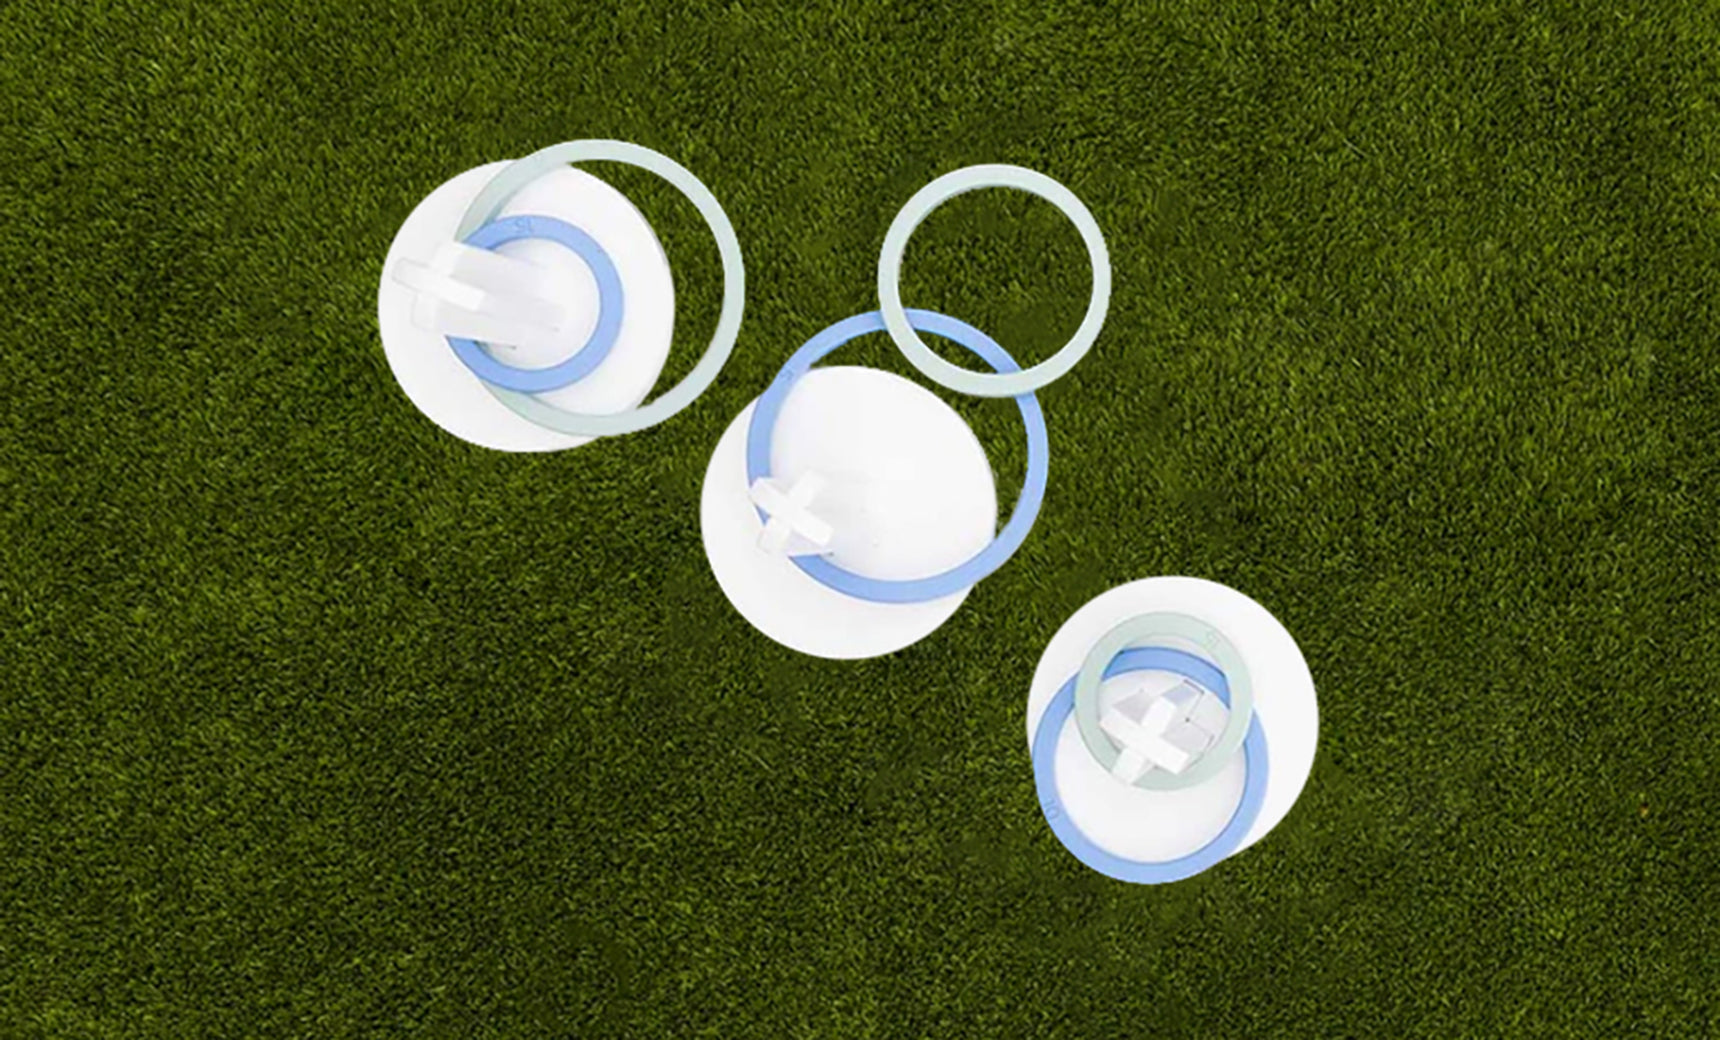 Ring toss game on lawn